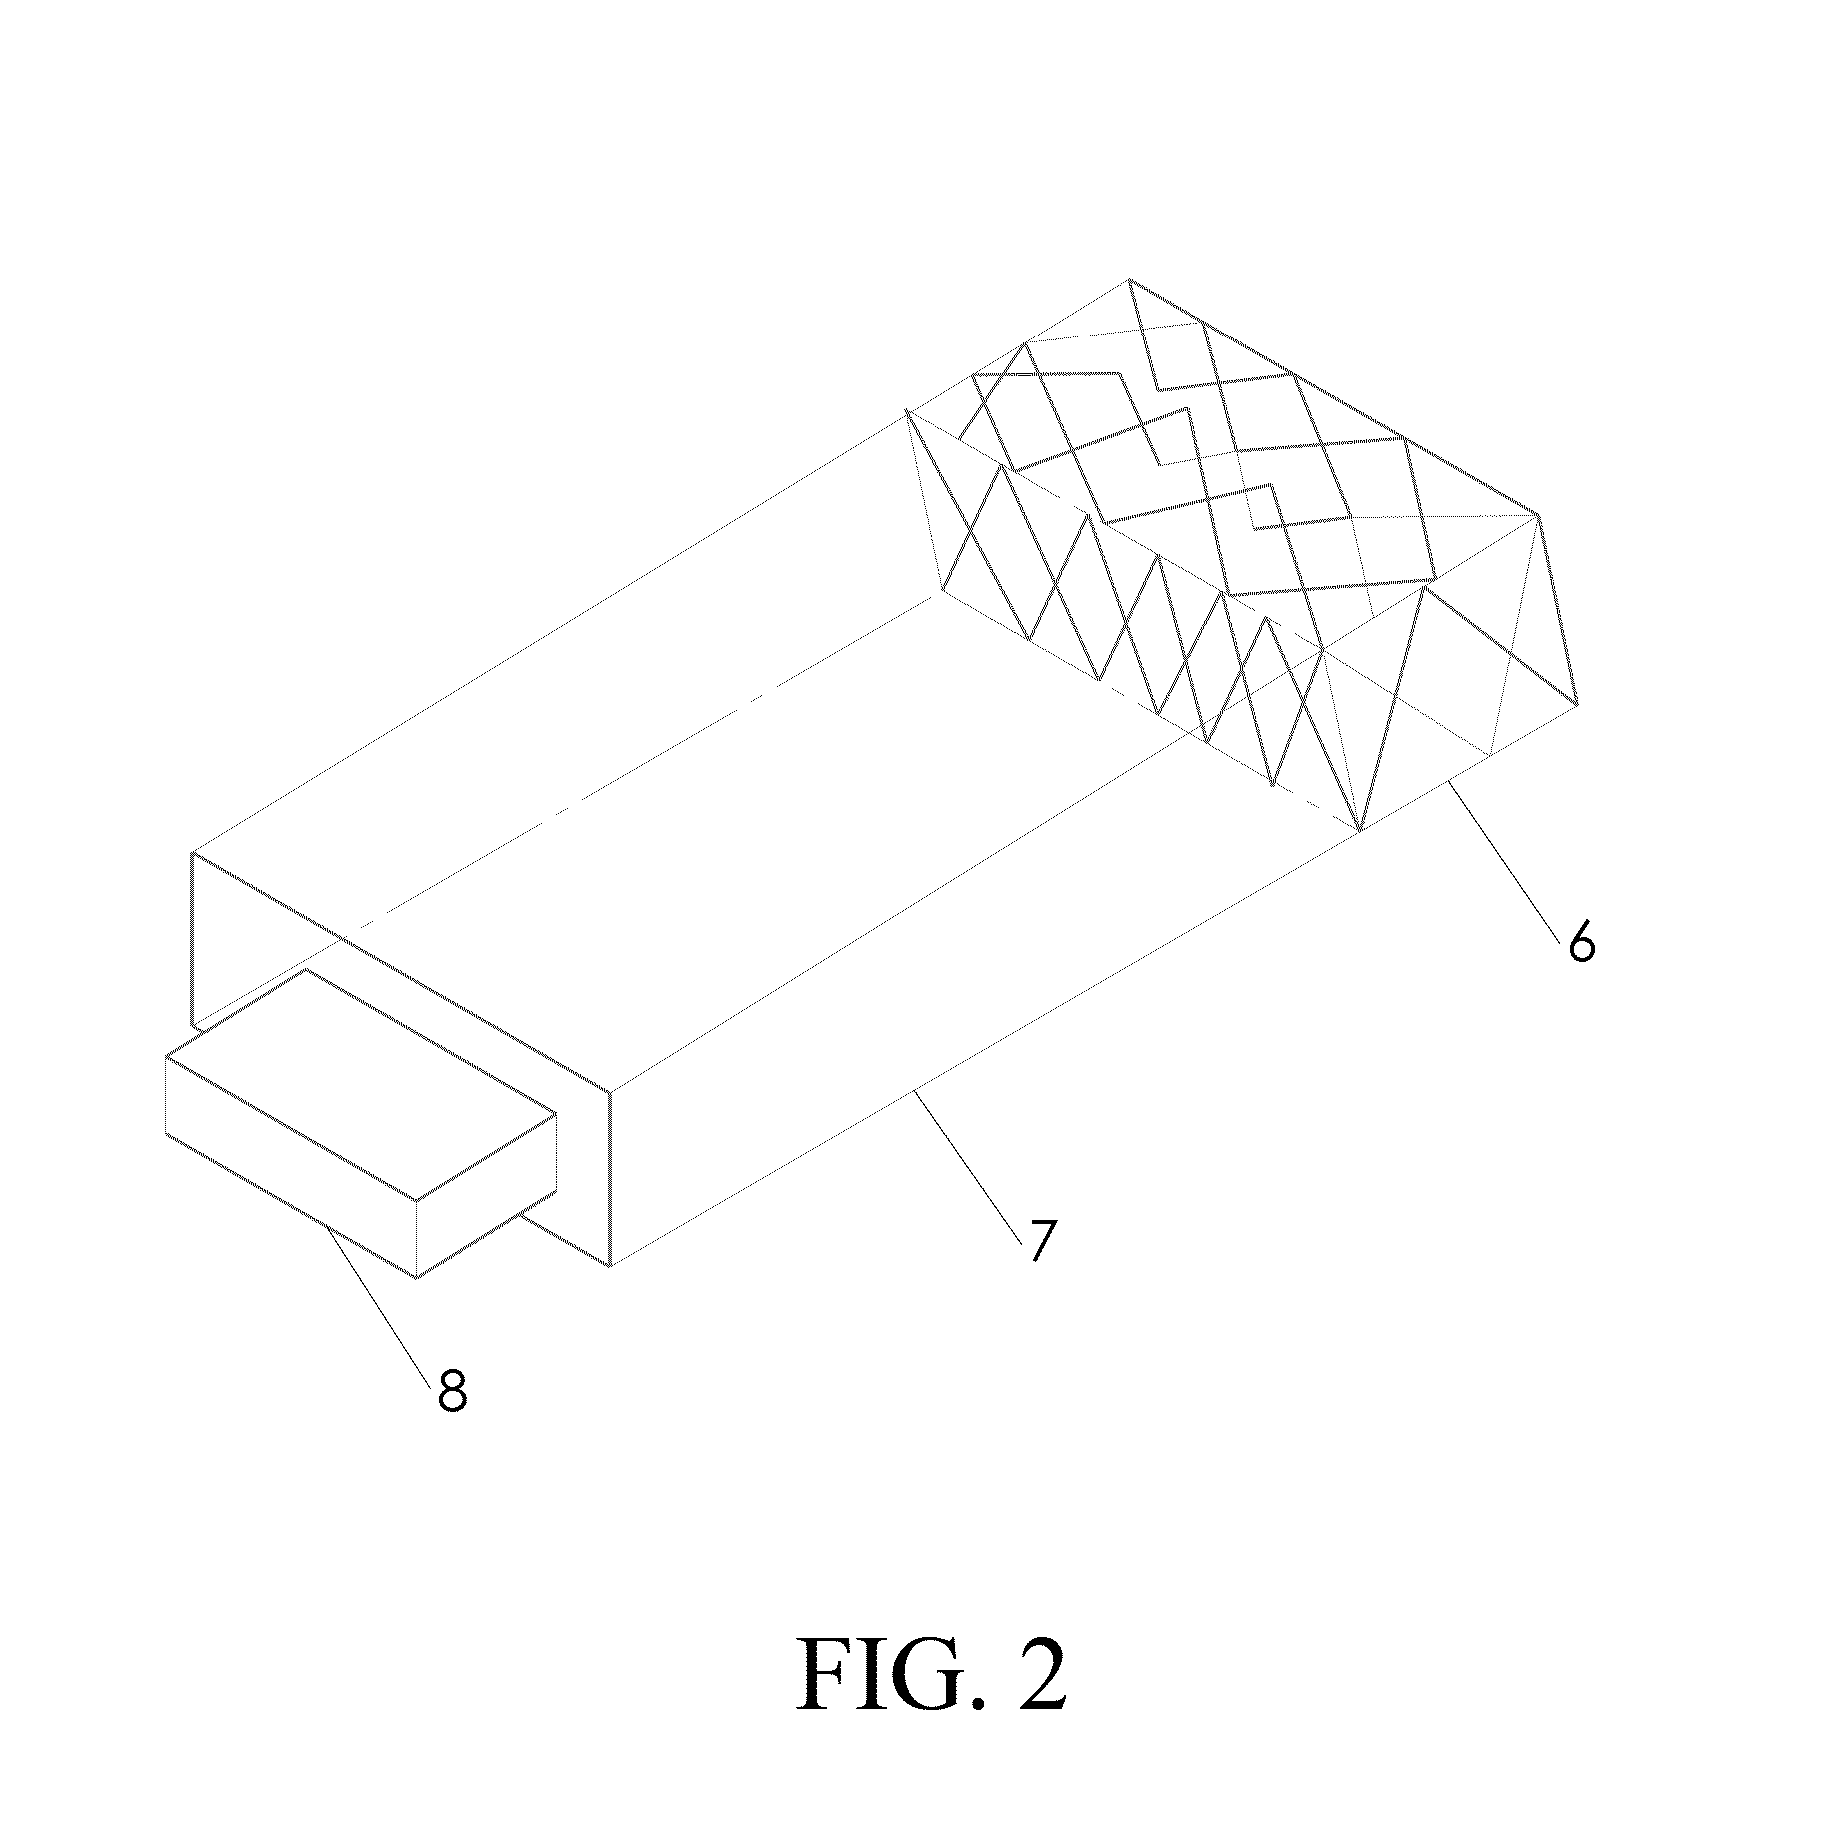 Microprojection elements for portable devices